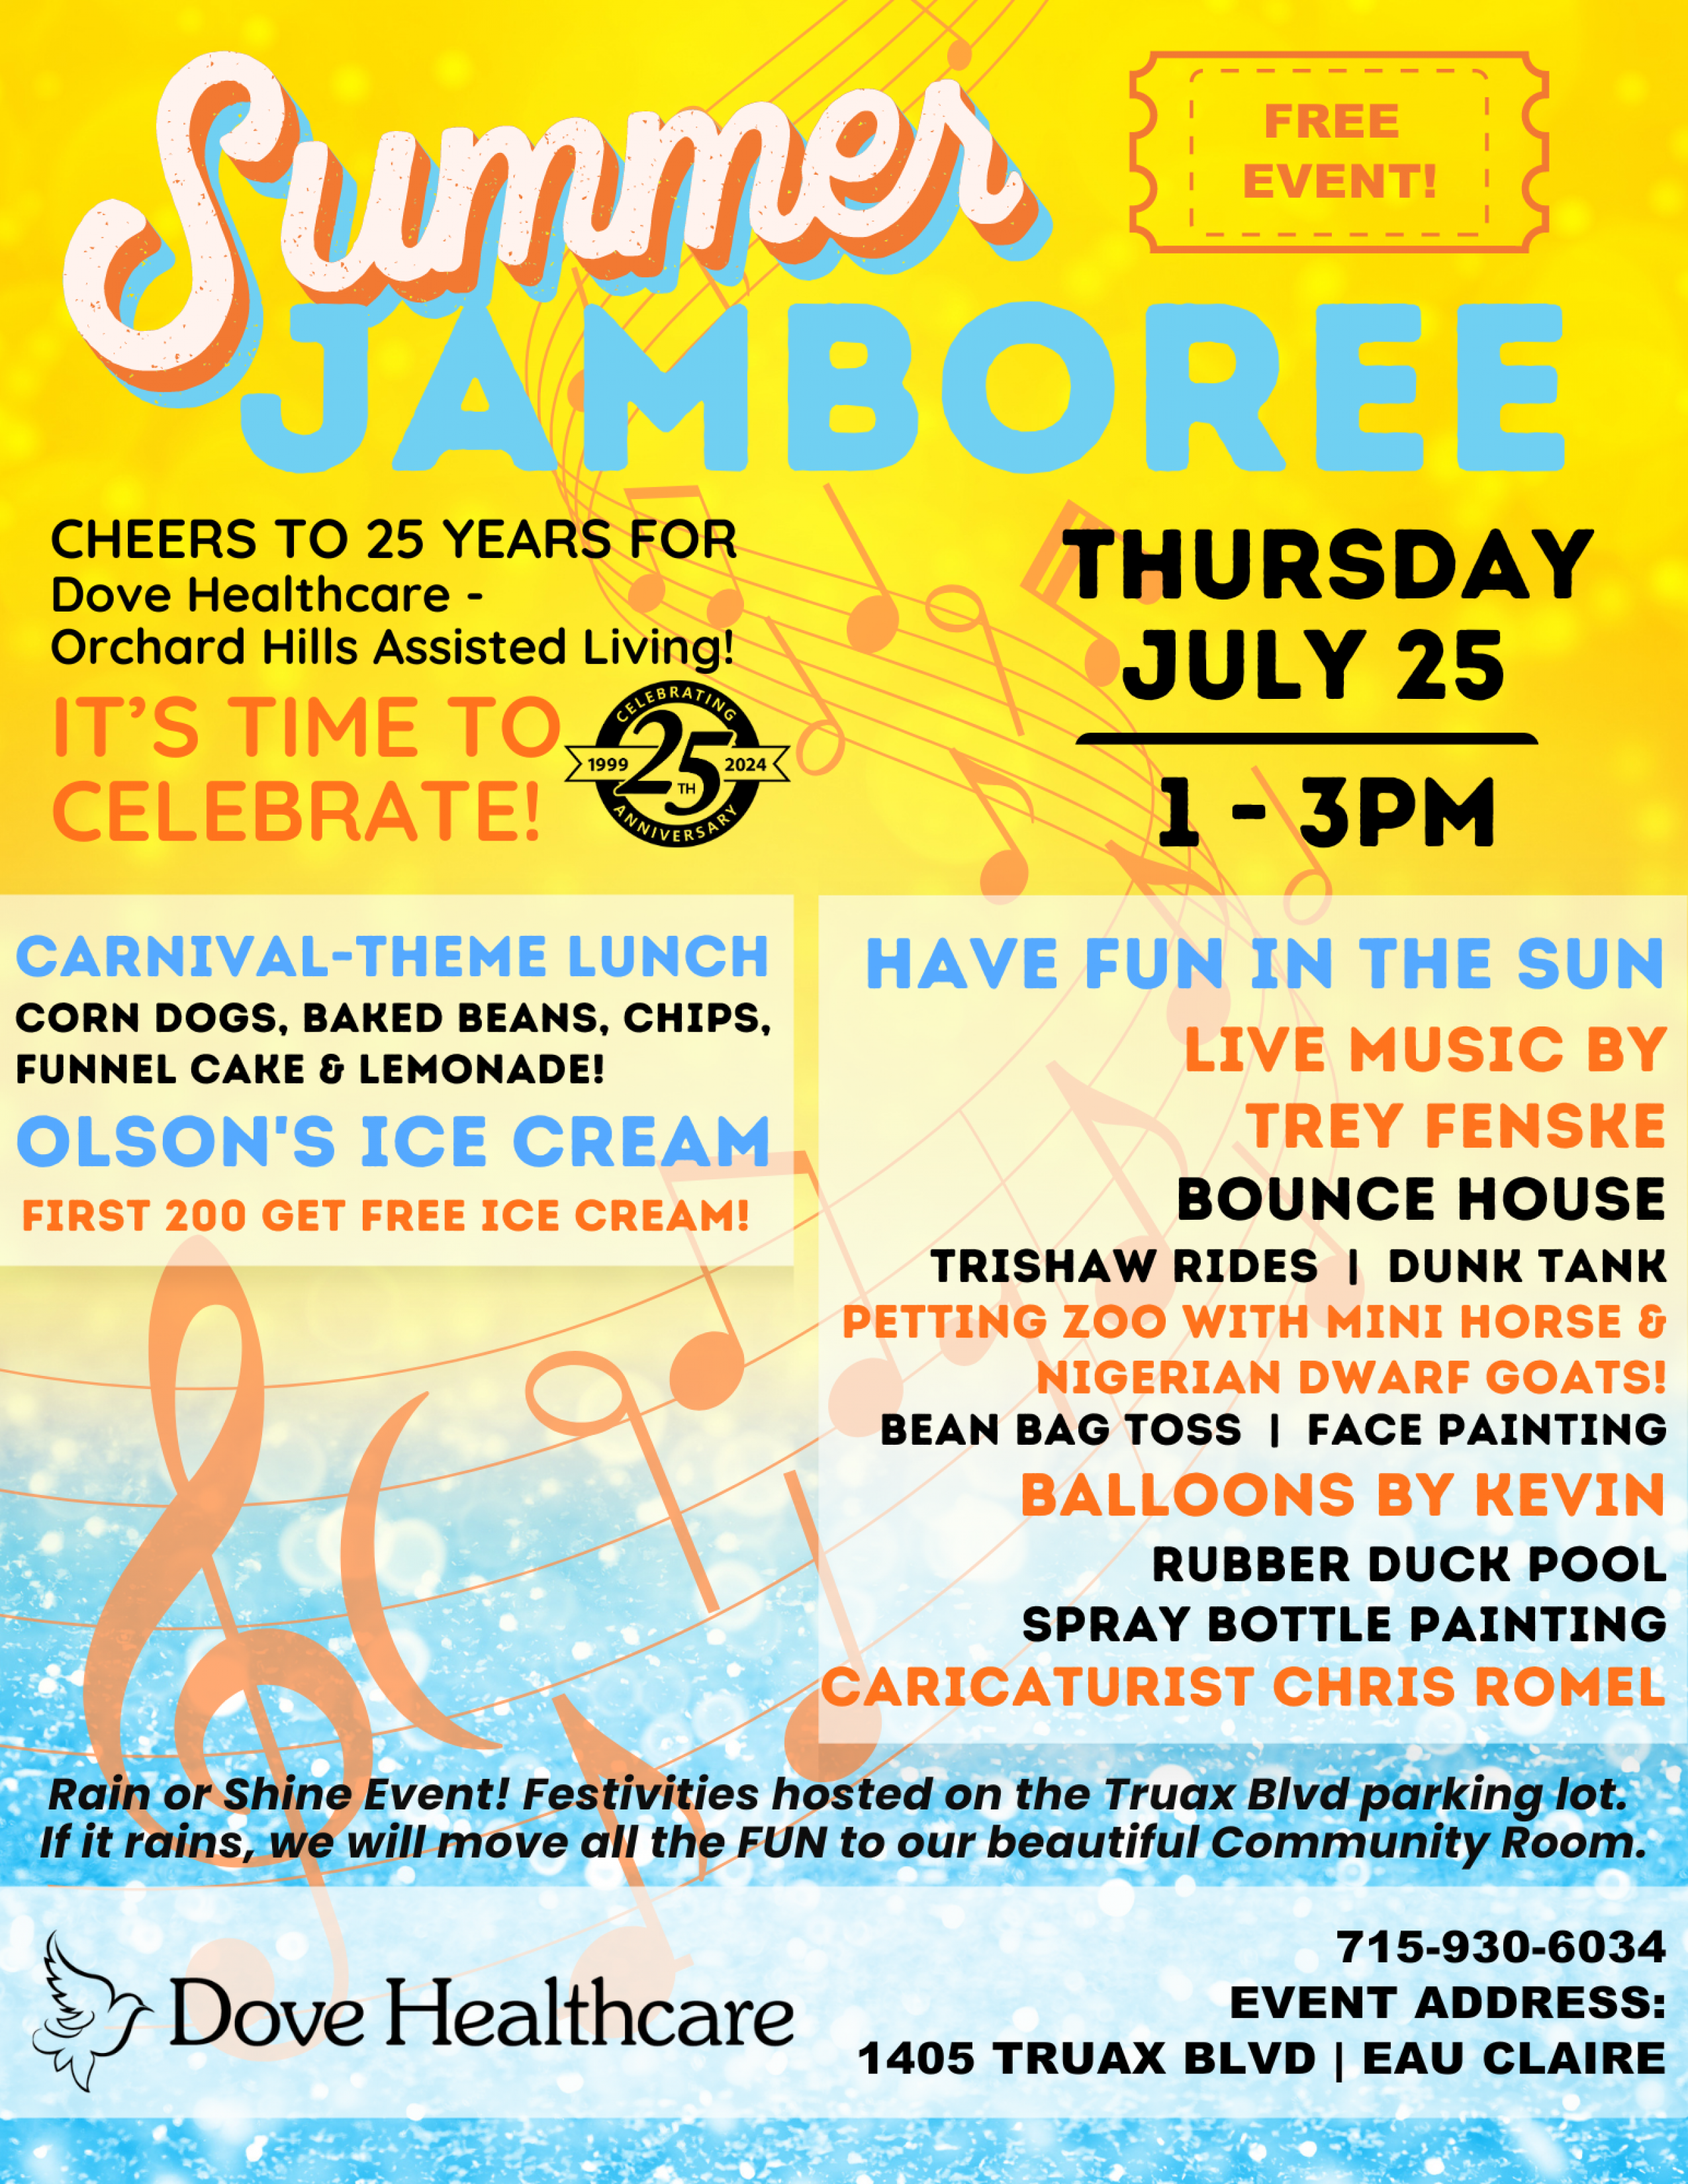 Summer Jamboree to Celebrate 25 Year Anniversary of Dove Healthcare - Orchard Hills Assisted Living!